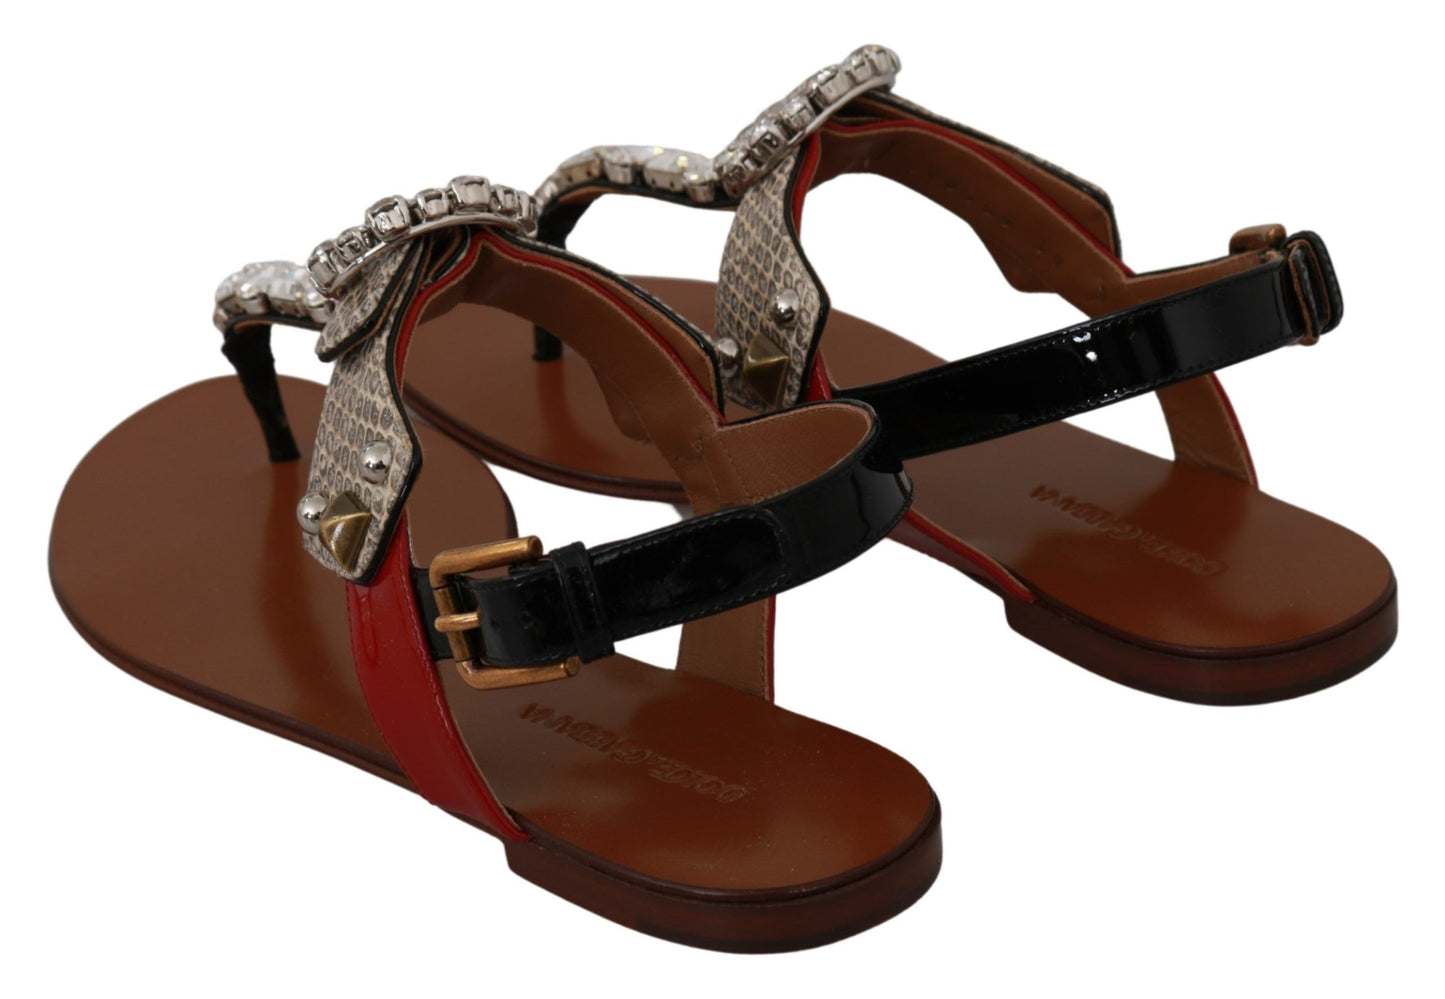 Leather Ayers Crystal Sandals Flip Flops Shoes - Designed by Dolce & Gabbana Available to Buy at a Discounted Price on Moon Behind The Hill Online Designer Discount Store